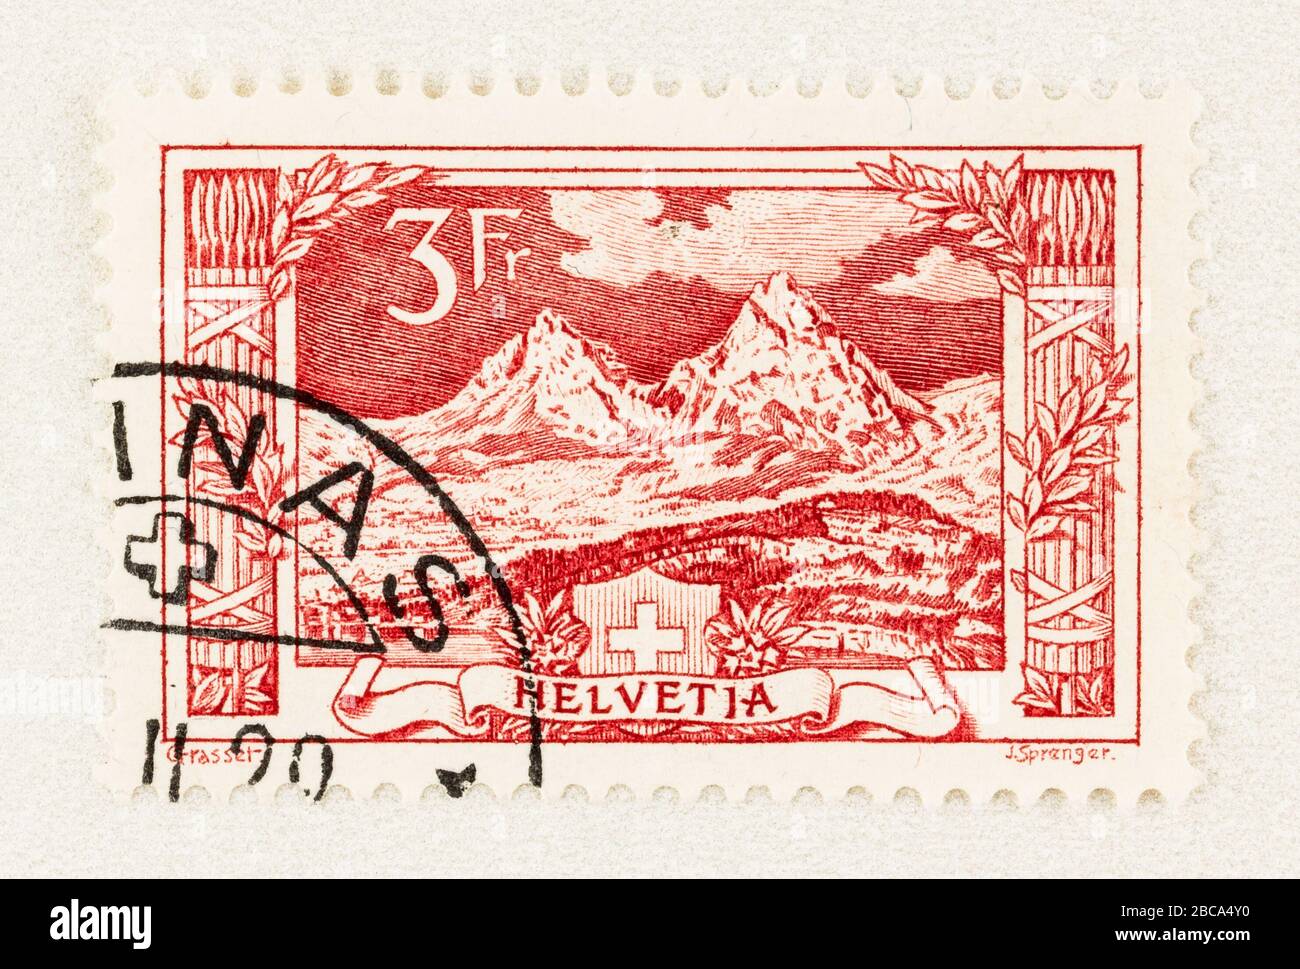 SEATTLE WASHINGTON - April 3, 2020: Close up of Swiss postage stamp  featuring Grosser Mythen, a mountain of Central Switzerland. Scott # 182. Stock Photo